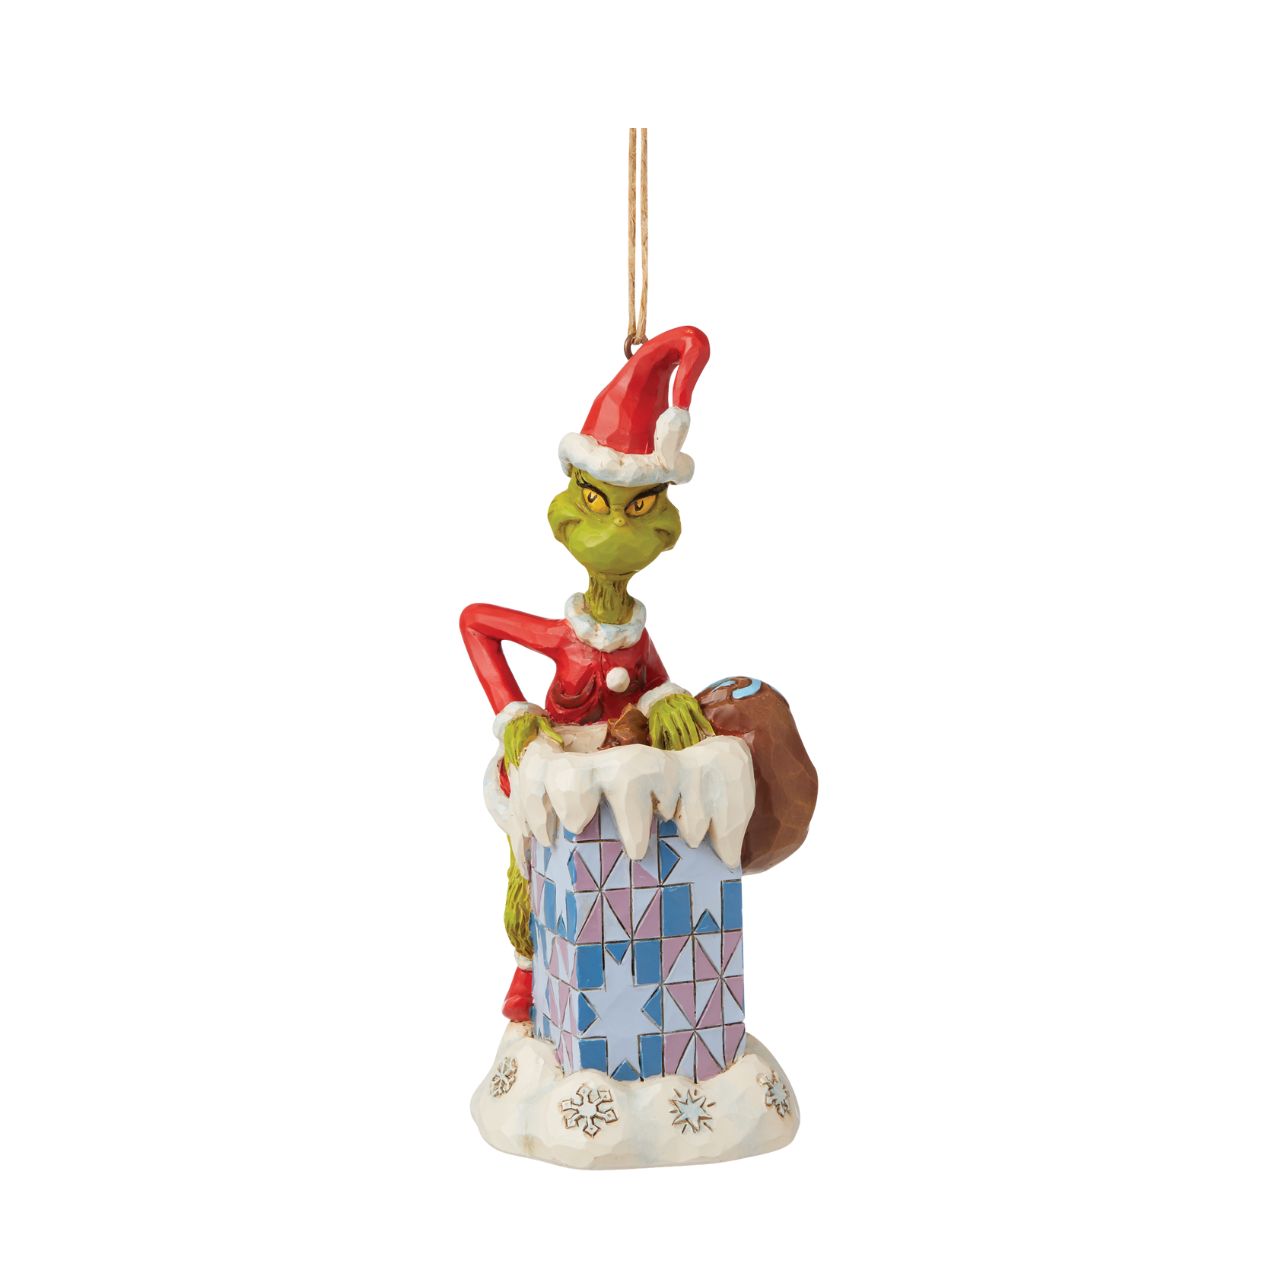 Grinch Climbing in Chimney Christmas Hanging Ornament  Marrying two beloved holiday figures, Jim Shore creates an ornament that captures the Grinch in all his glory. With holly brimmed in his Santa hat, no one dares kiss this Christmas Nutcracker for fear of being cracked across the face.